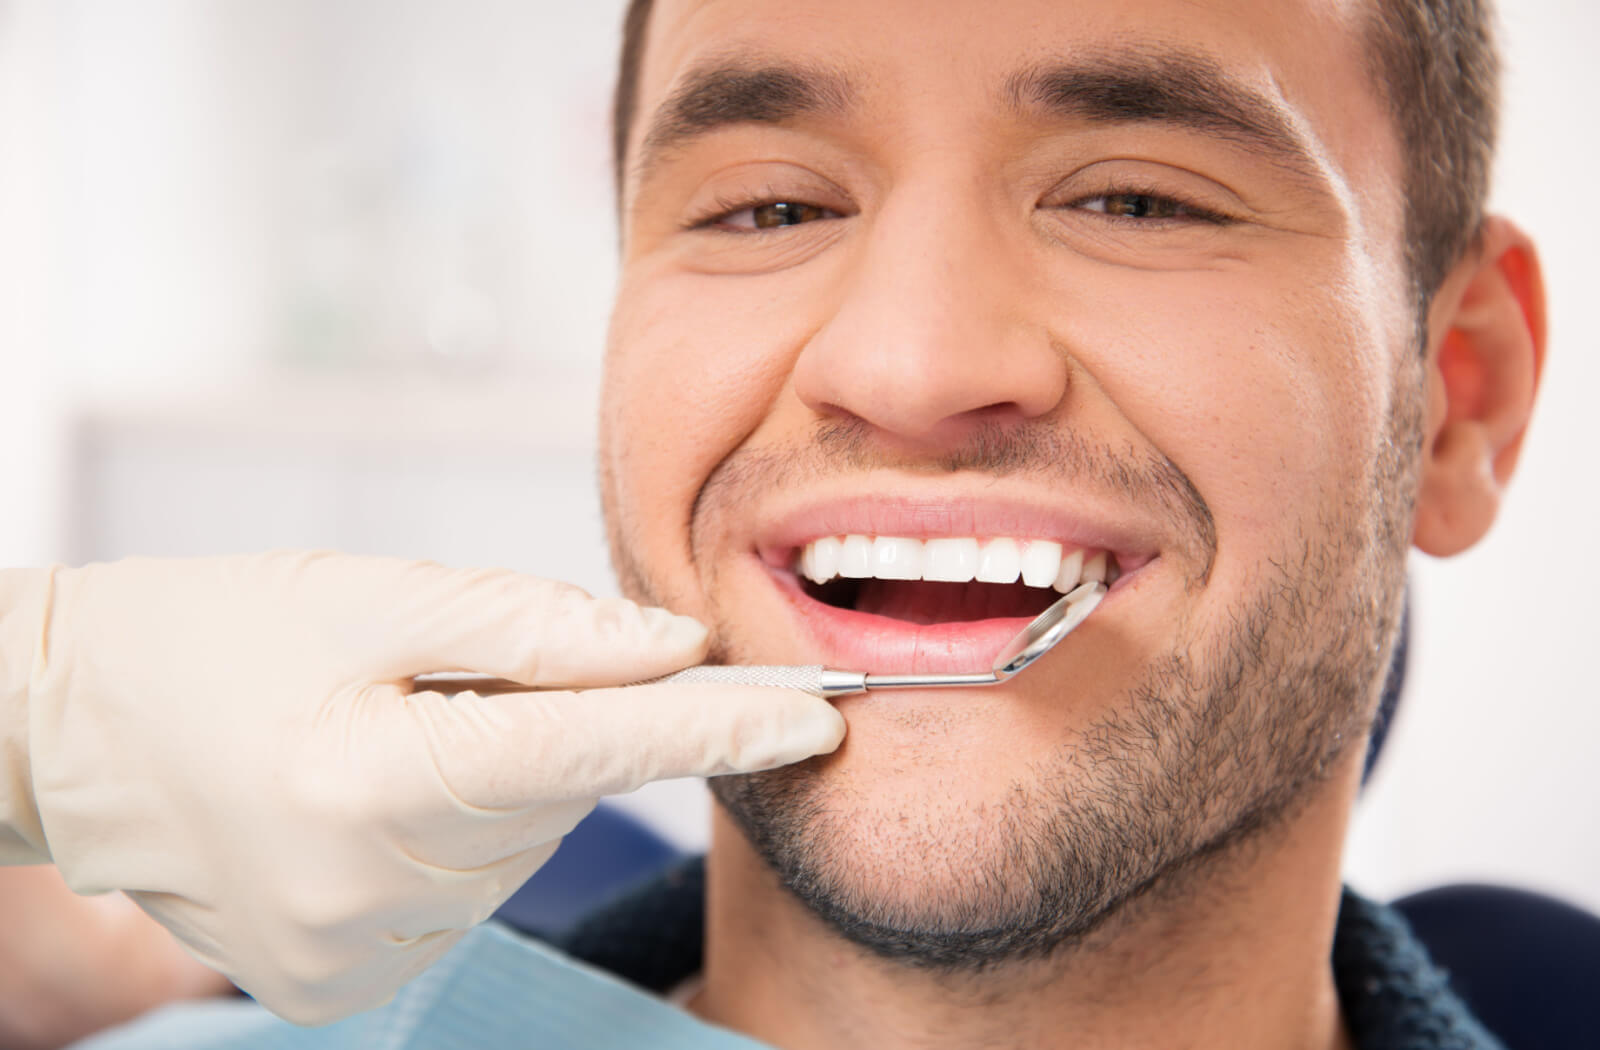 What to Expect During Your Dental Exam